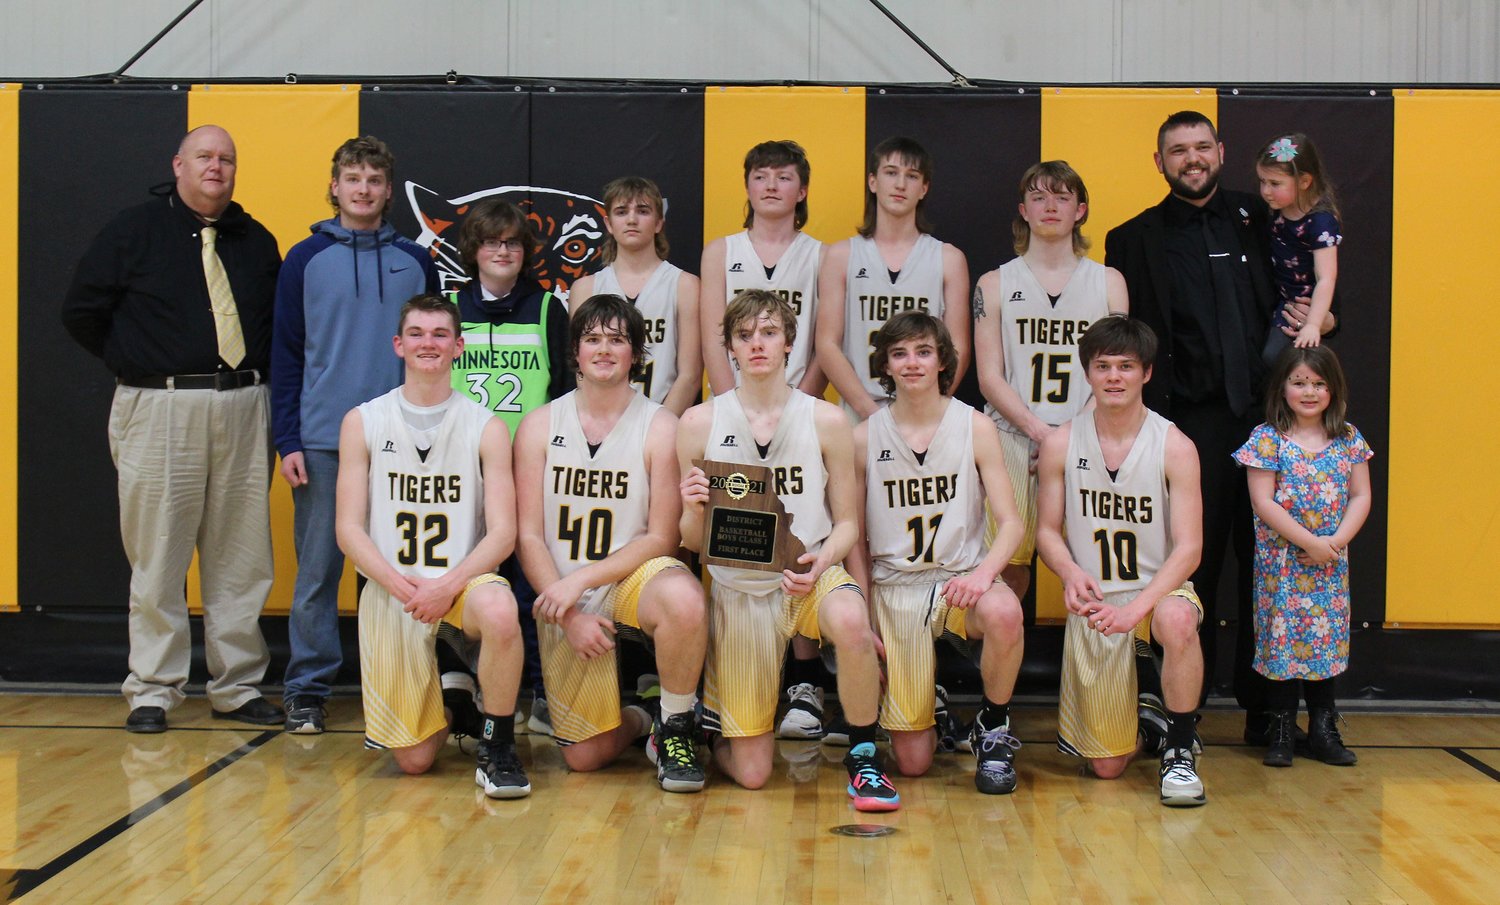 The 2020-21 Higbee High School boys basketball team won the Class 1 District 10 tournament championship, the school's first of its kind in athletic history, by defeating Community R-VI of Laddonia Thursday by a 61-31 result at home. Team members are (wearing white jerseys, left to right) Jordan Fuemmeler, Jamie Smith, Keetun Redifer, Derek Rockett and Luke Ritter. Second row players are Chevy Grimsley, Will Spilman, Jaxon Hudson and Chad Crawford. Head coach Tanner Burton is shown second row right holding his daughter, and assistant coach David Roush (second row, left).